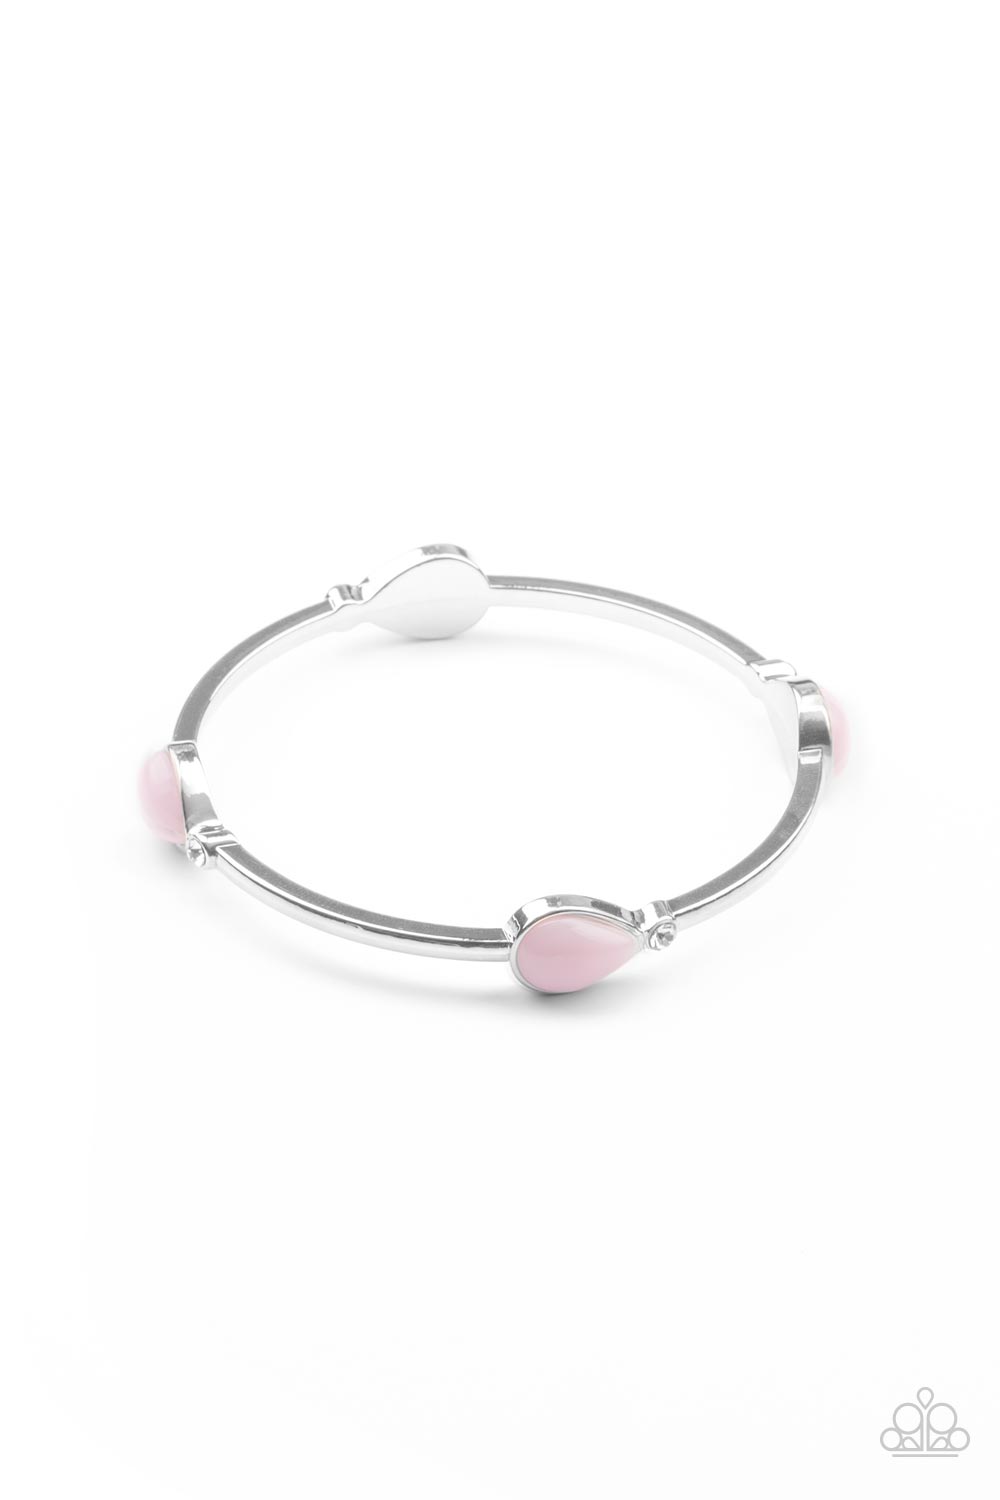 Paparazzi Dewdrop Dancing - Pink Bracelet - A Finishing Touch Jewelry